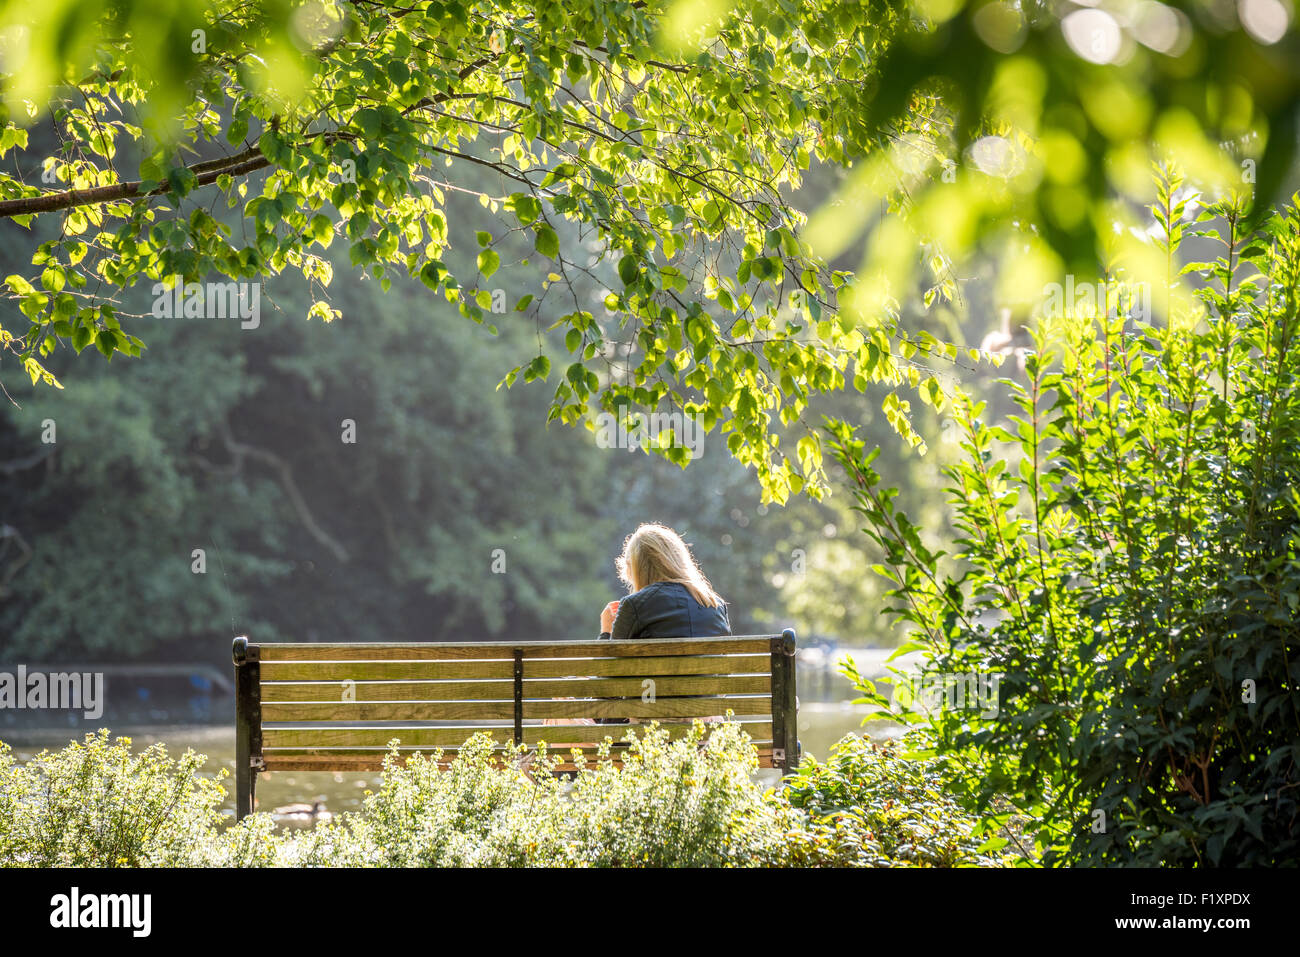 a-woman-sat-on-a-bench-backlit-by-the-su